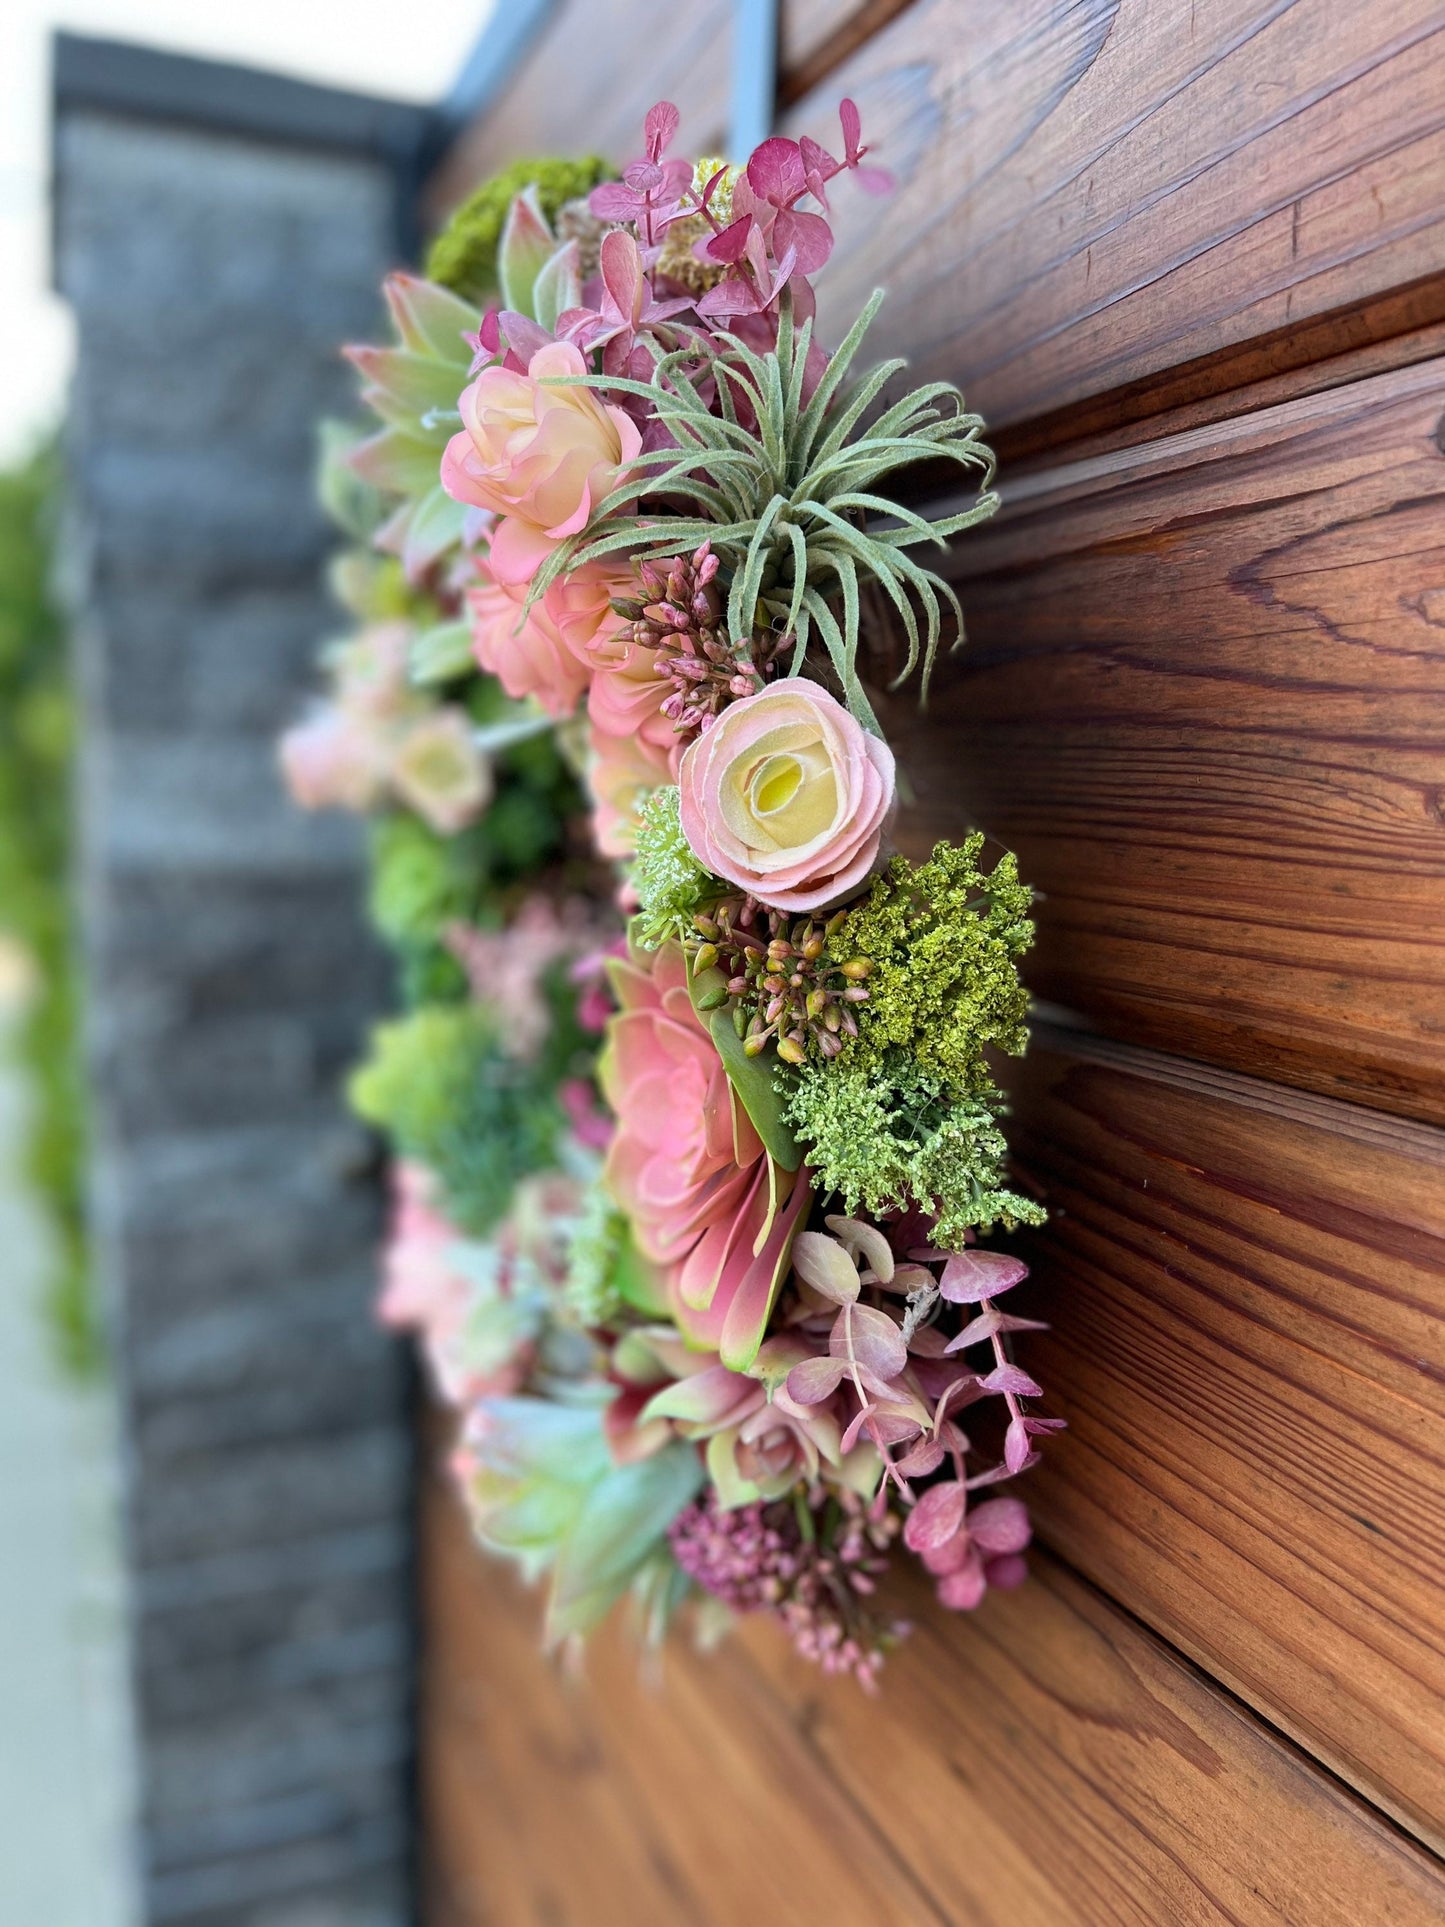 Artificial succulent wreath. Pink and green faux succulent wreath for front door.  Easter wreath